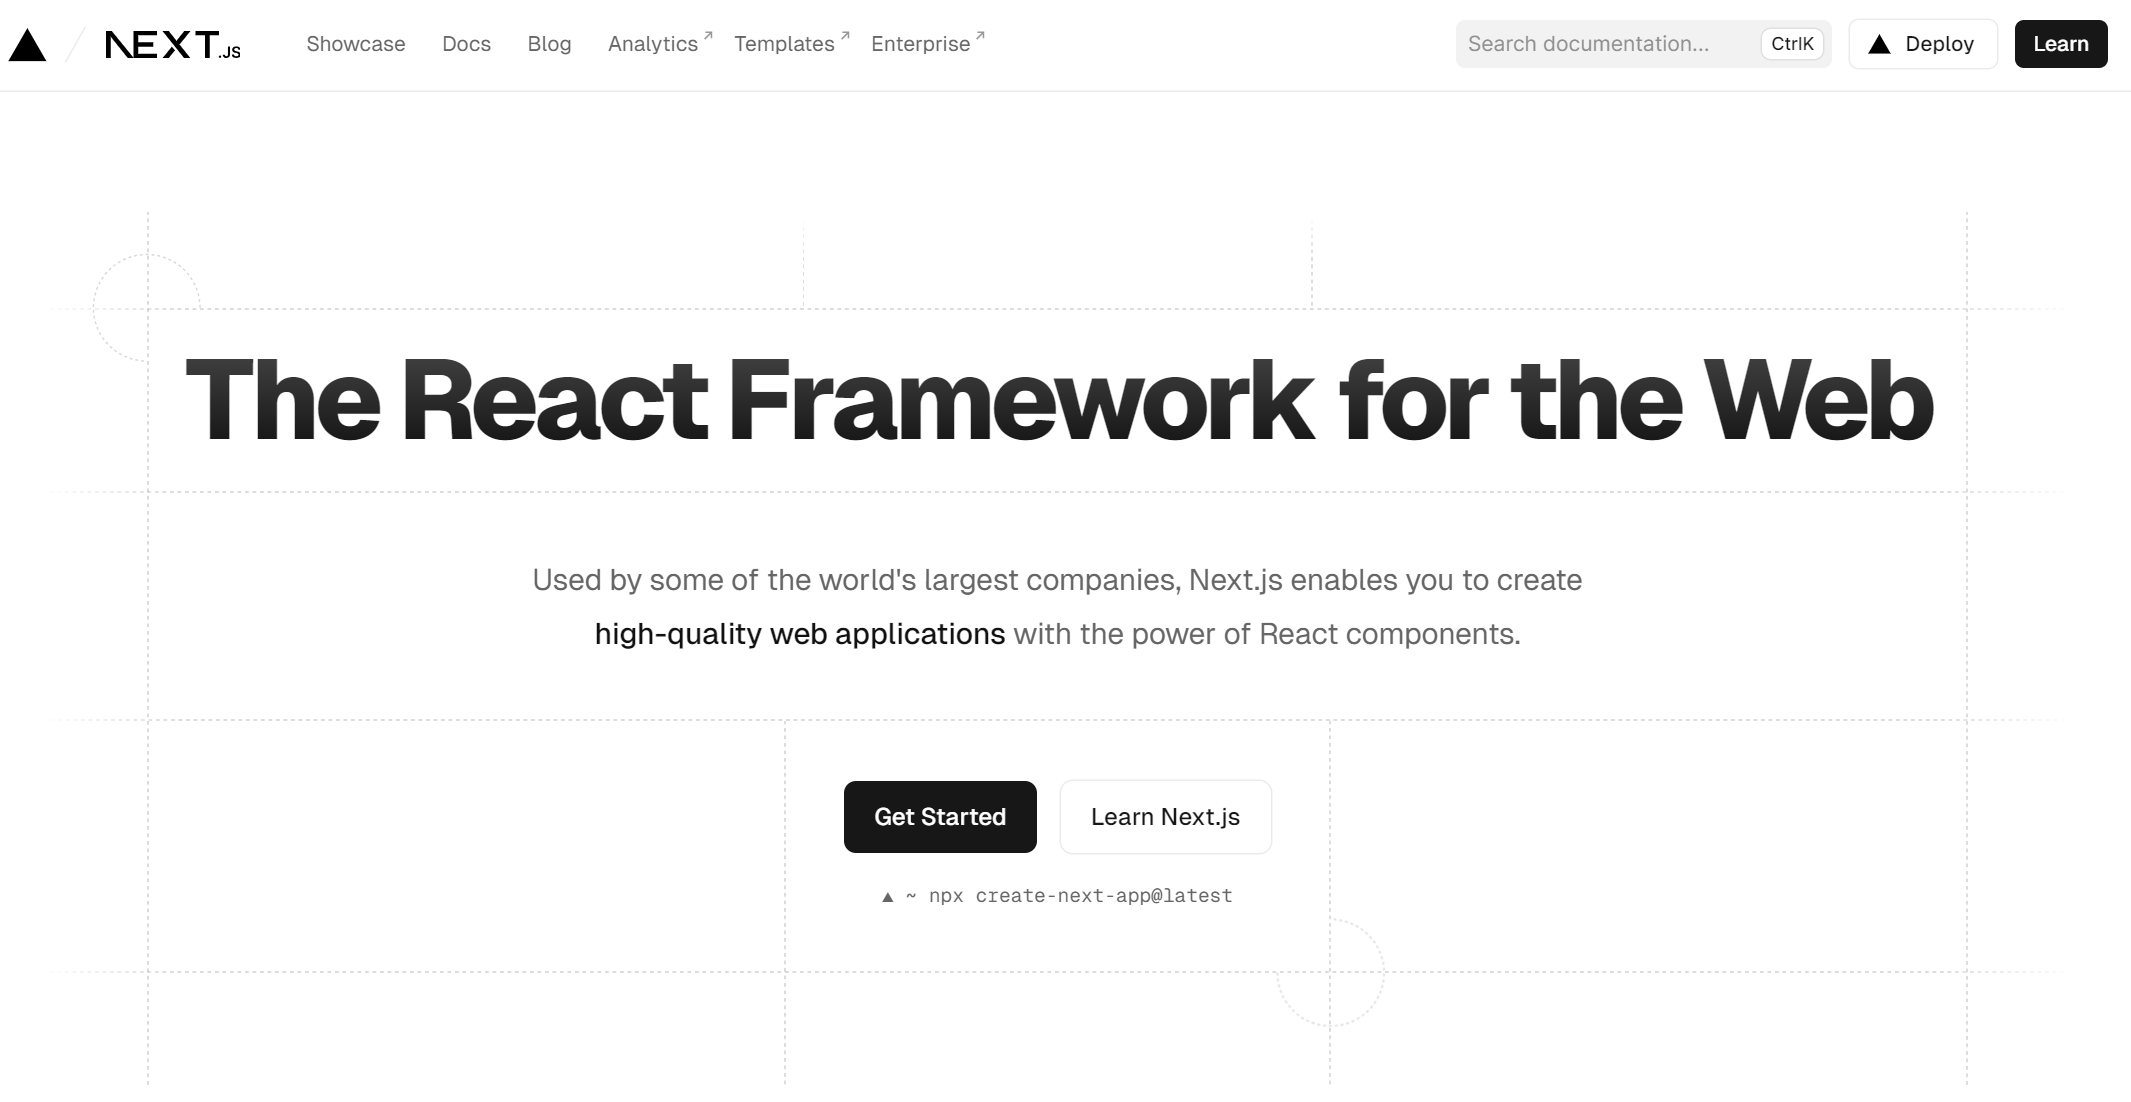 Next.js, The React Framework for the Web!